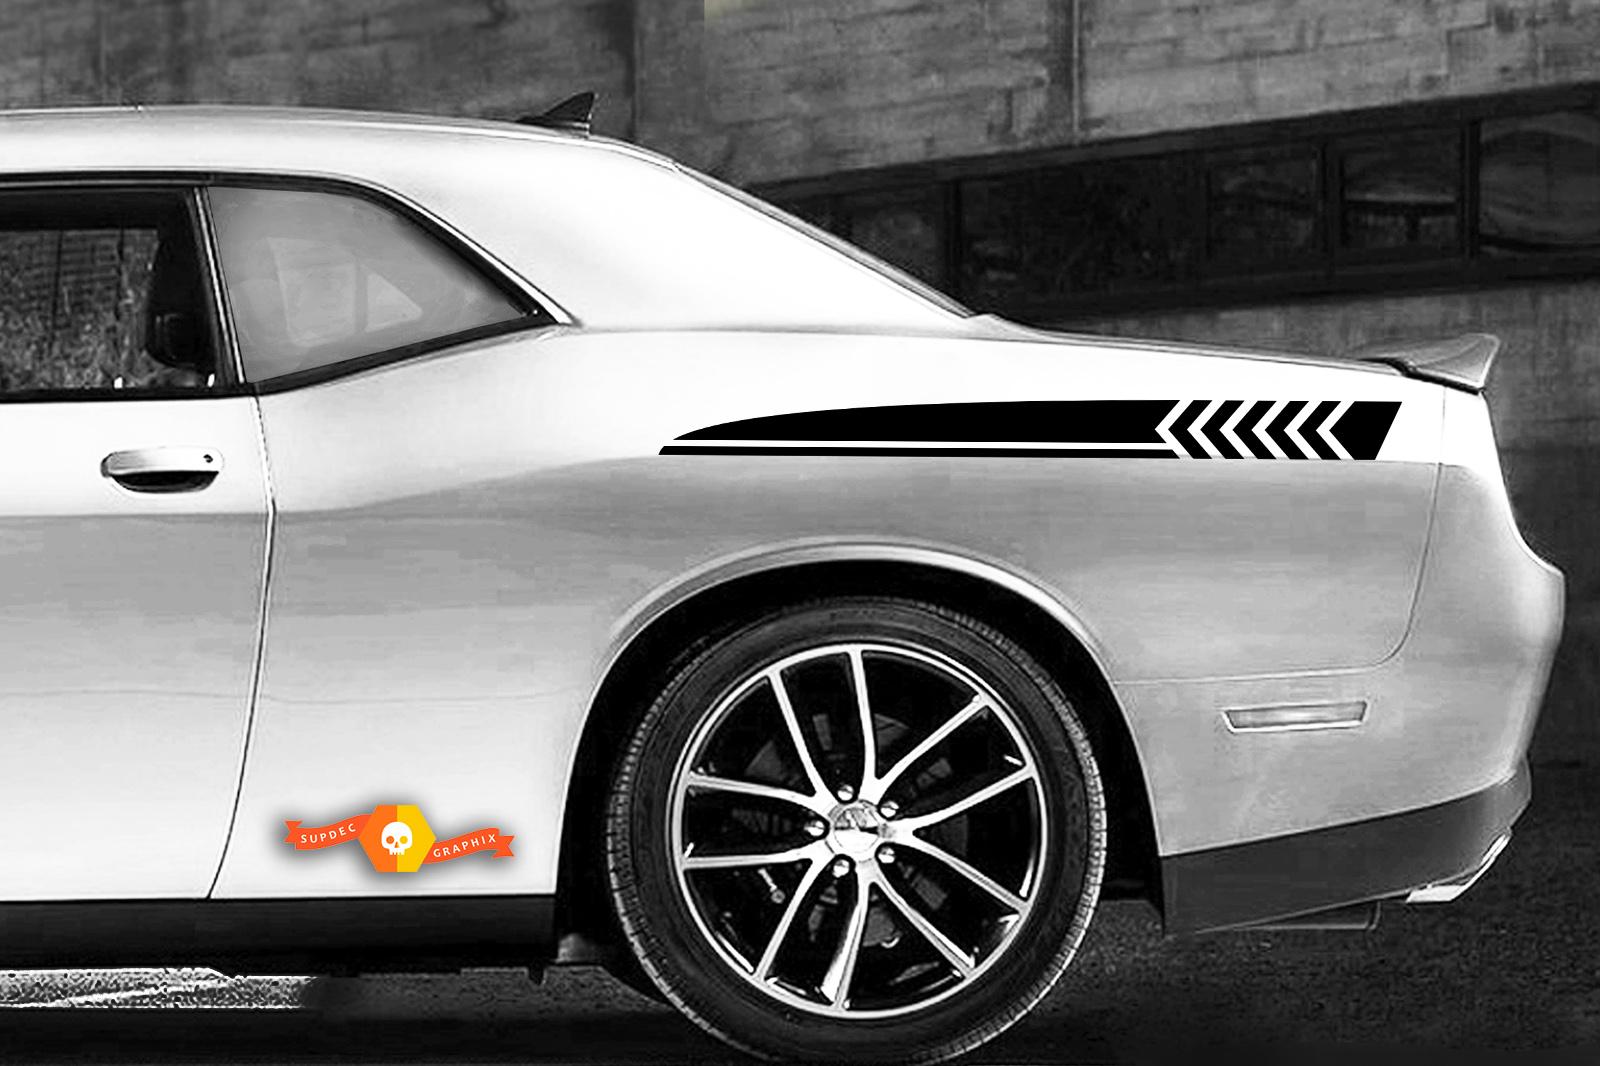 2x side Sticker Decal kit fit to Dodge Challenger